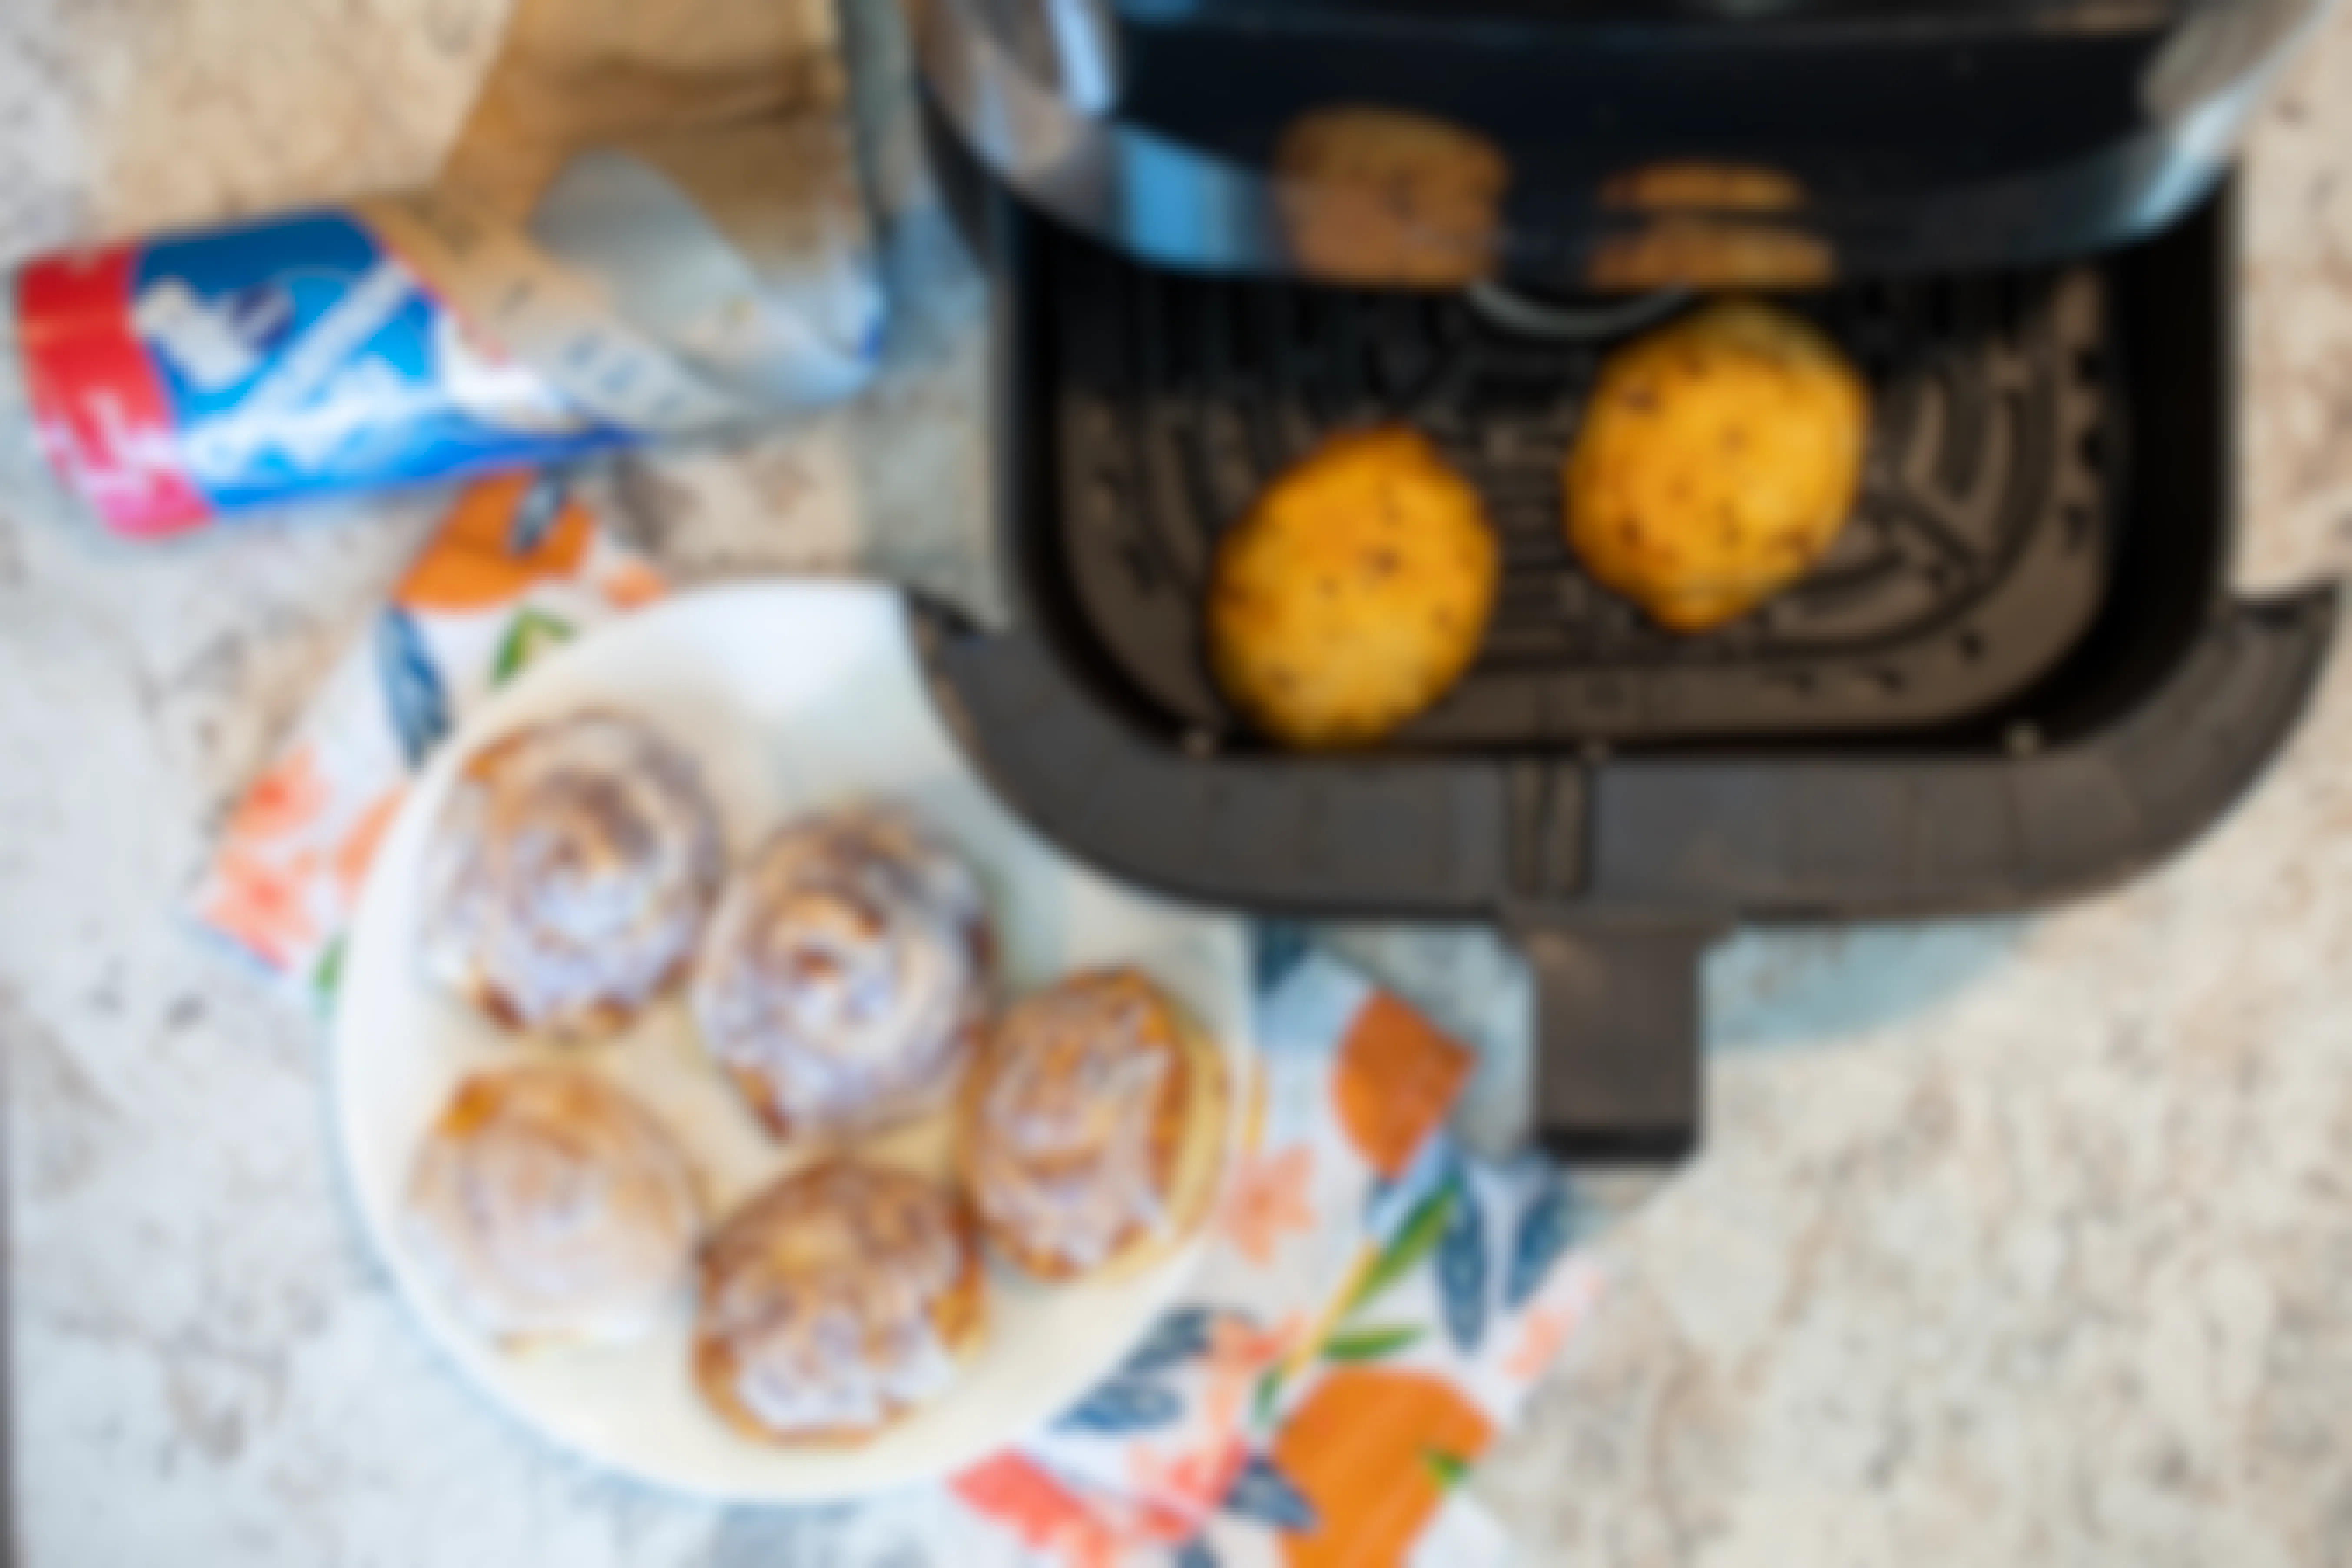 Cinnamon rolls on a plate and in an open air fryer